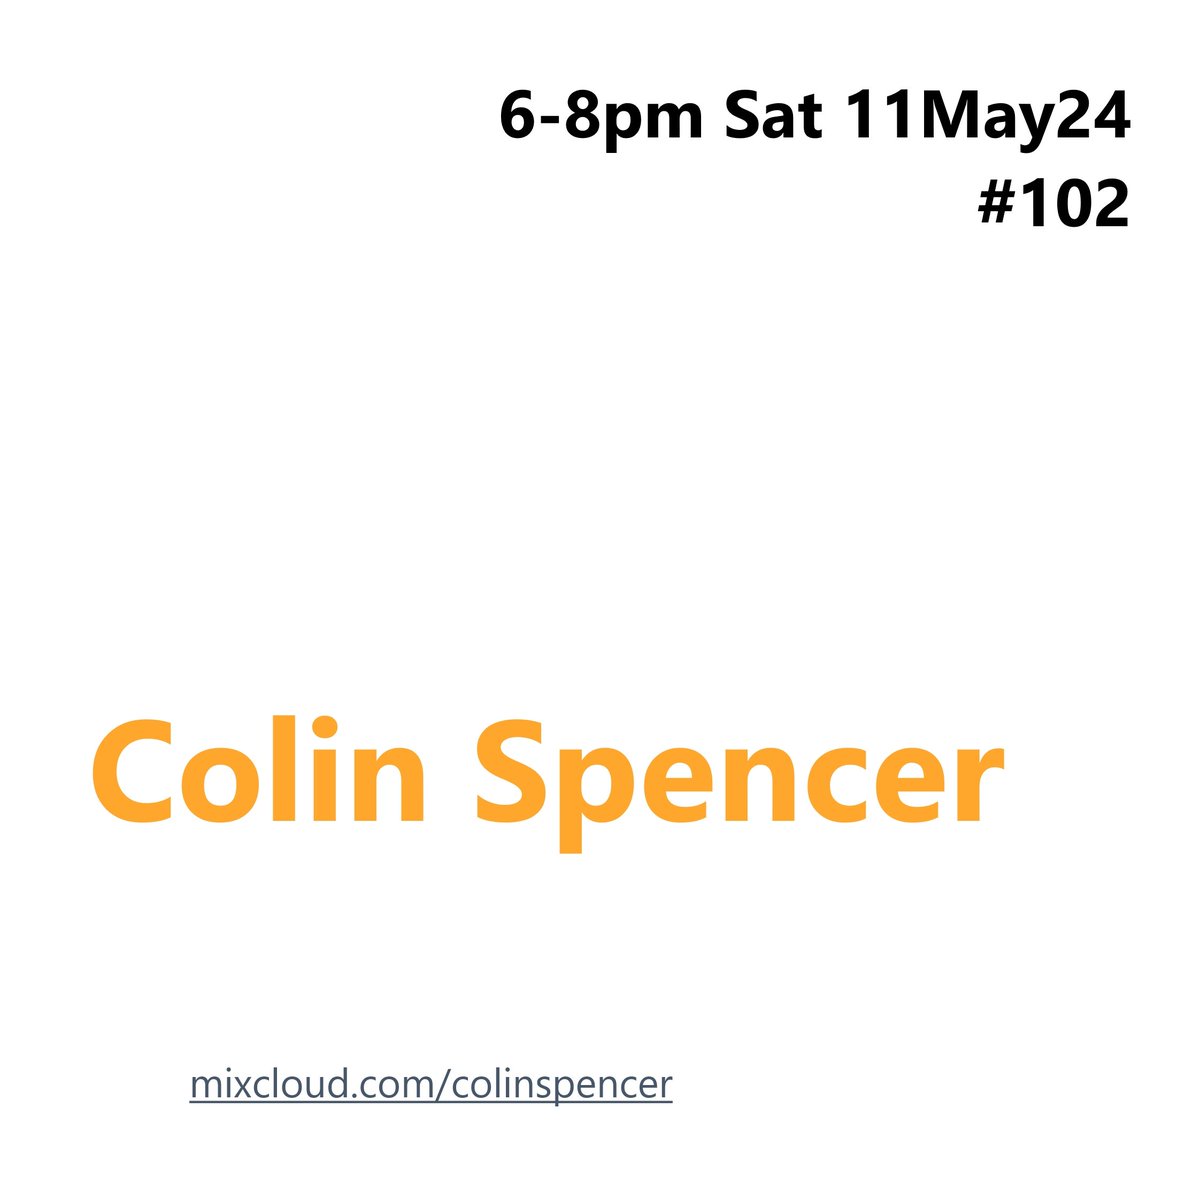 Artists with #NewMusic during #ColinSpencer Programme #102 include #SorrowStories 🔊mixcloud.com/colinspencer/🎧 Saturday 11 May 2024 6-8pm (#UK times) #DiscoverAndRemember @SorrowStories Audio pleasures also available right now throughout catch-up #097 ▶️mixcloud.com/ColinSpencer/c…